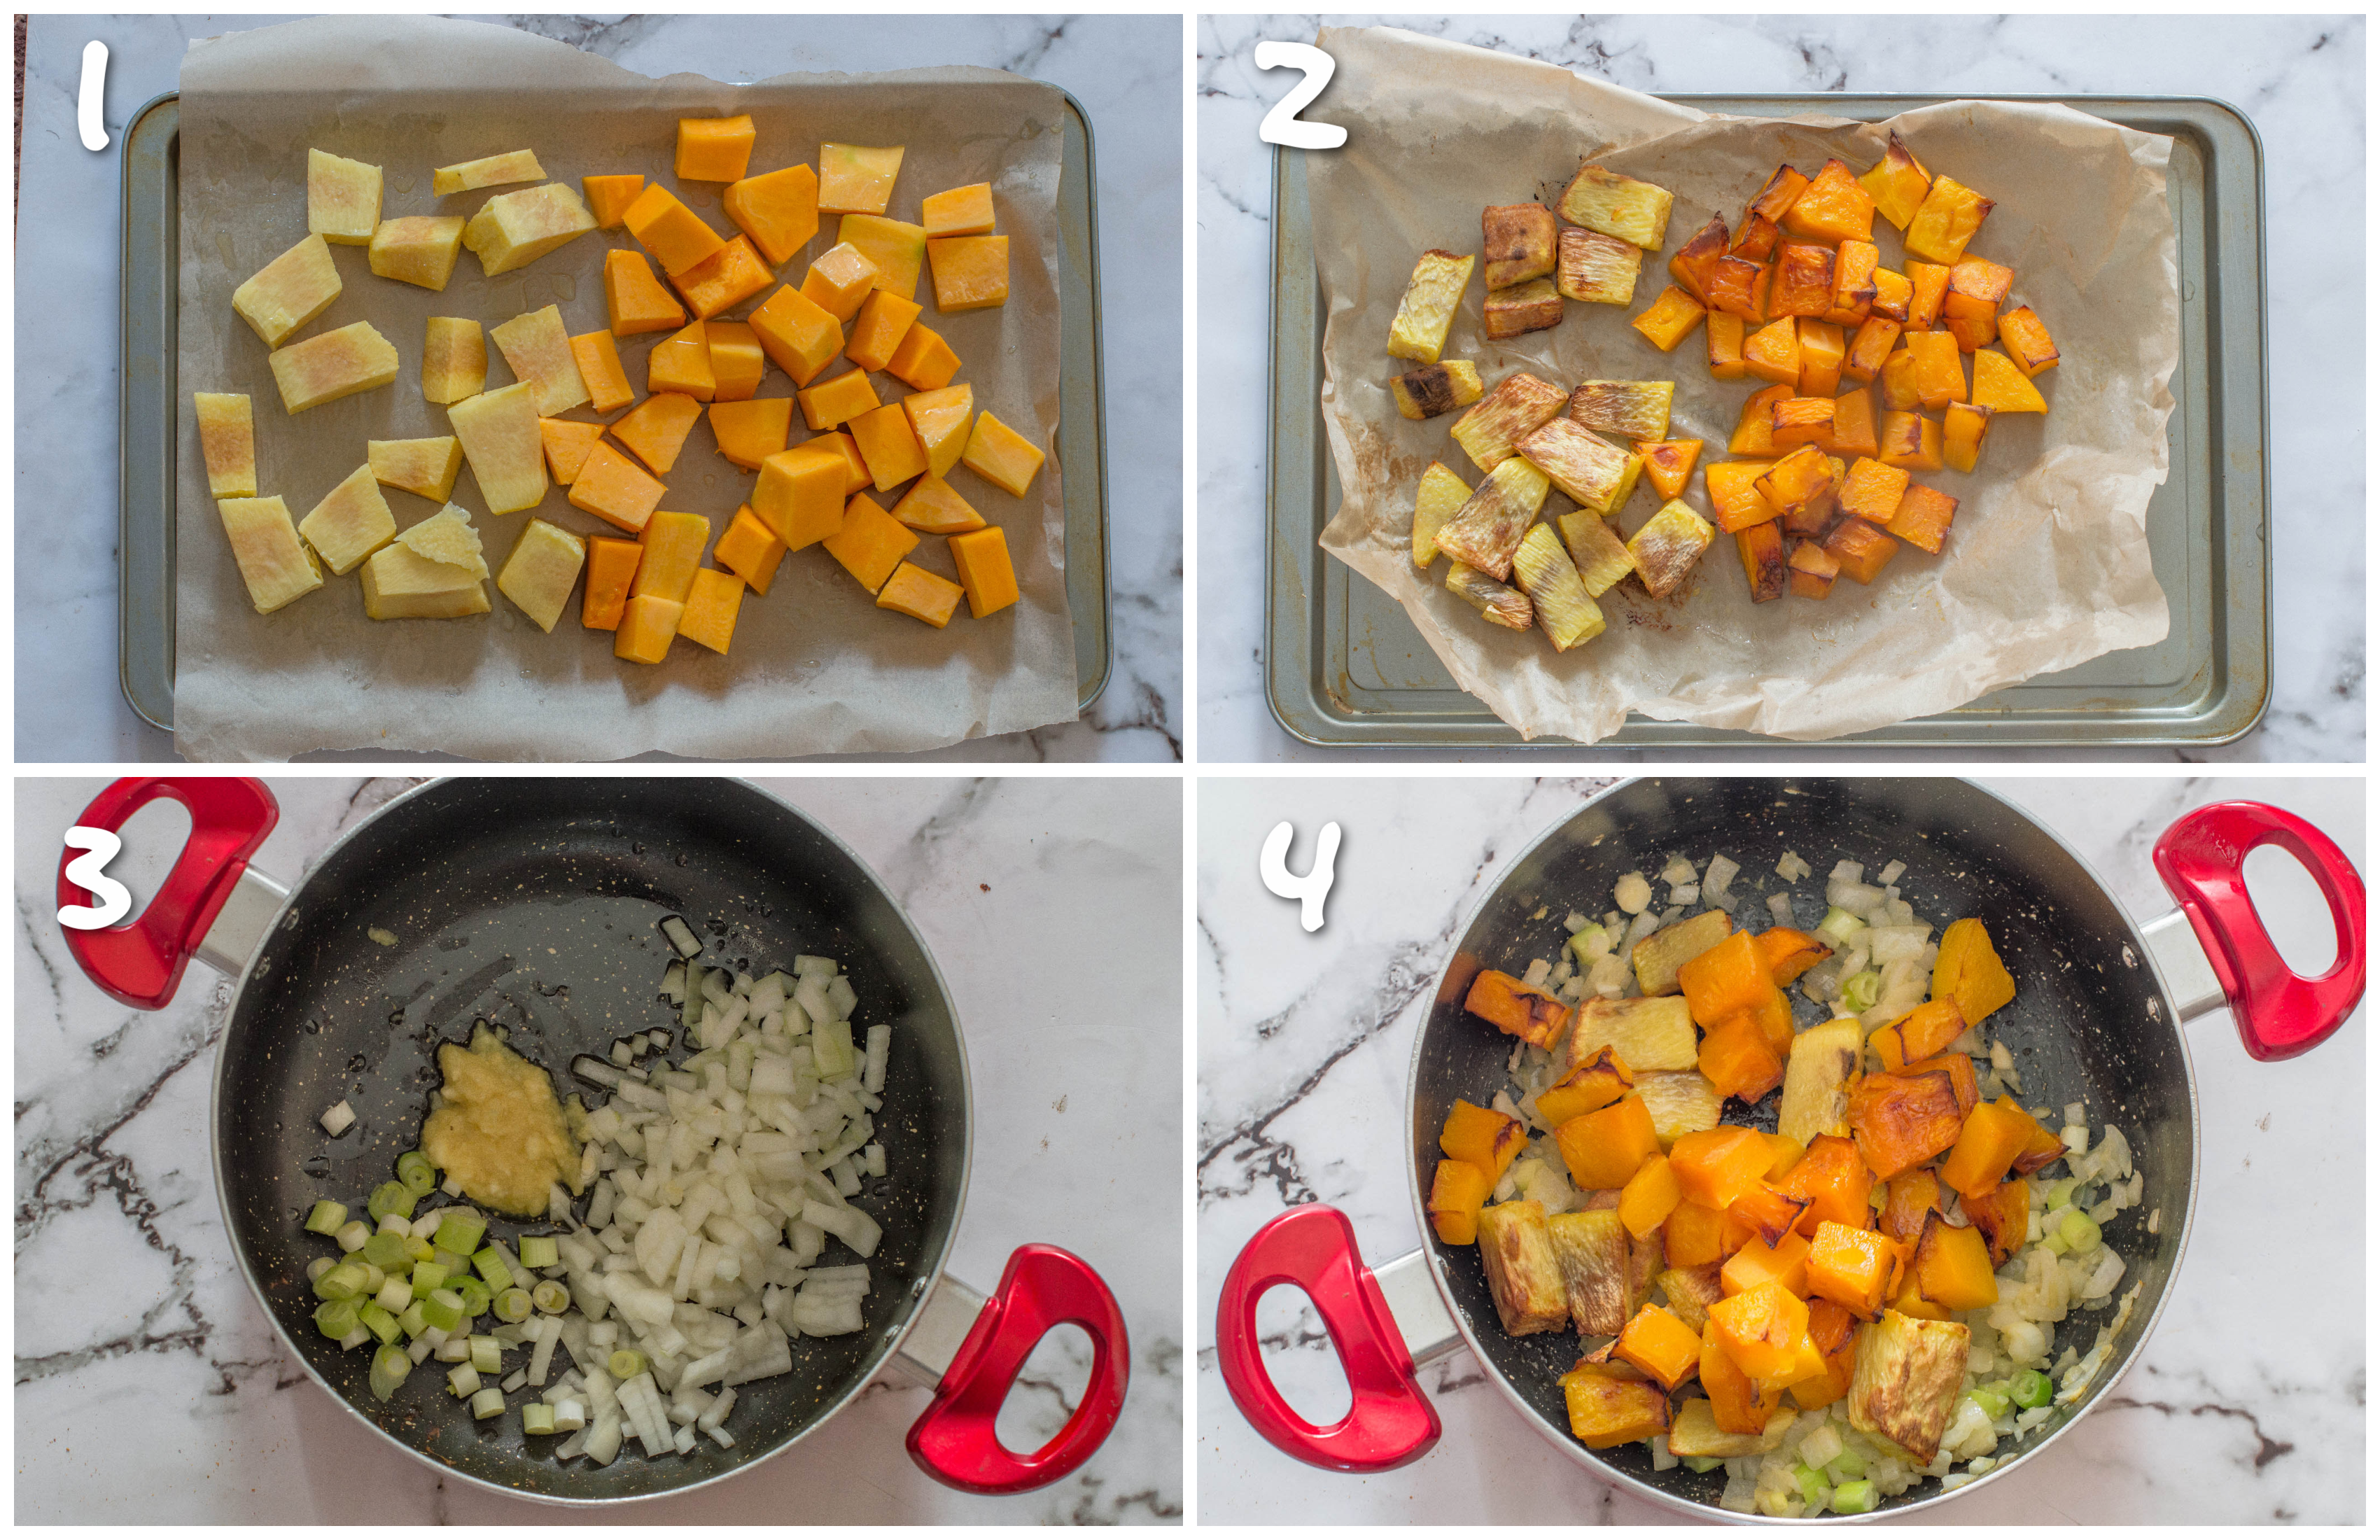 Steps 1-4 roasting the pumpkin and yellow yam